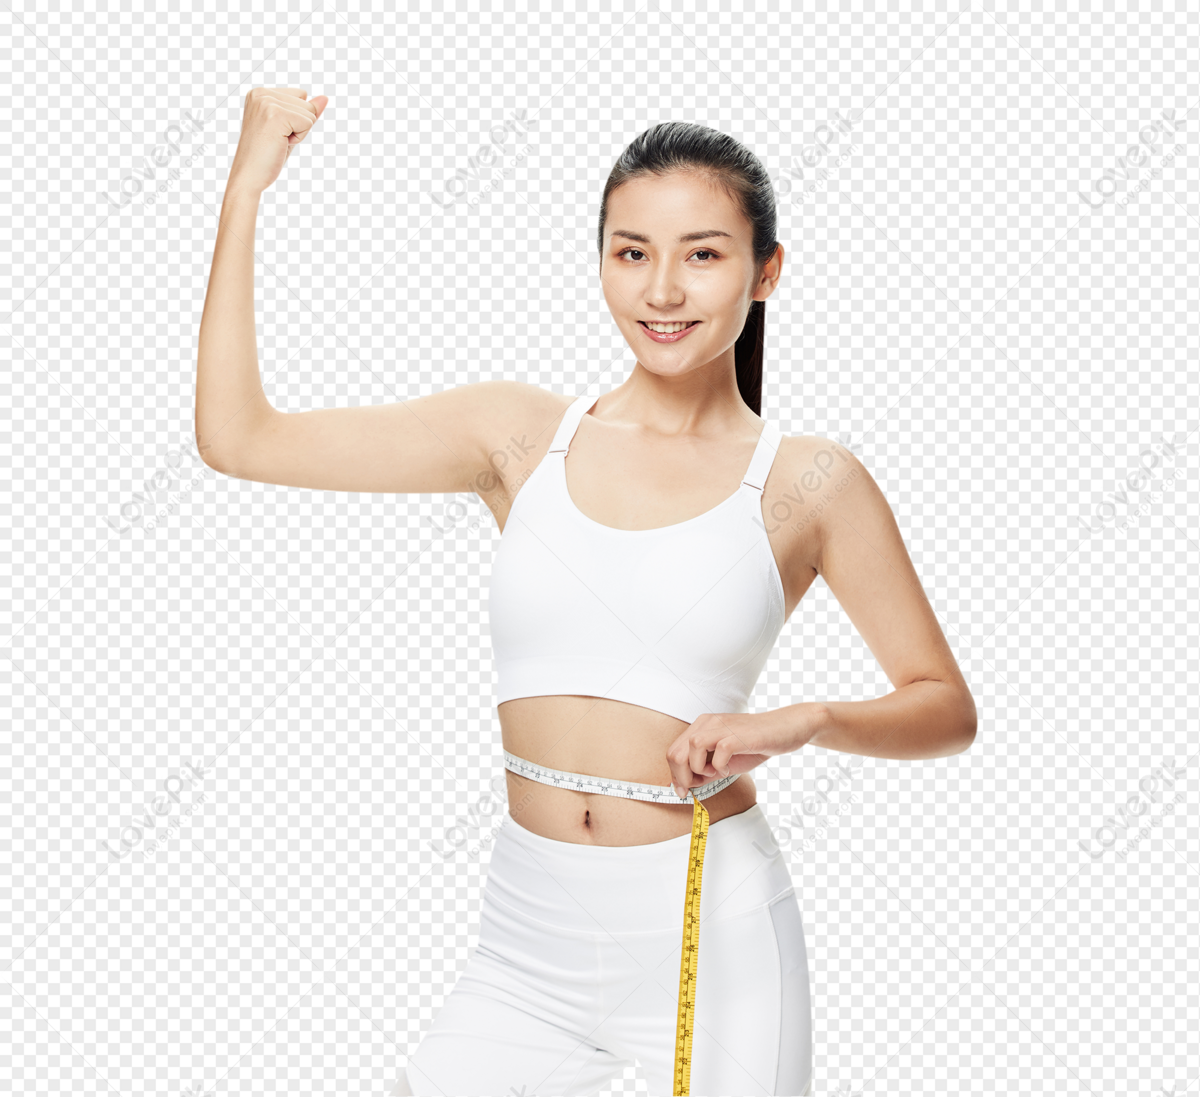 Measuring Waist PNG Images With Transparent Background